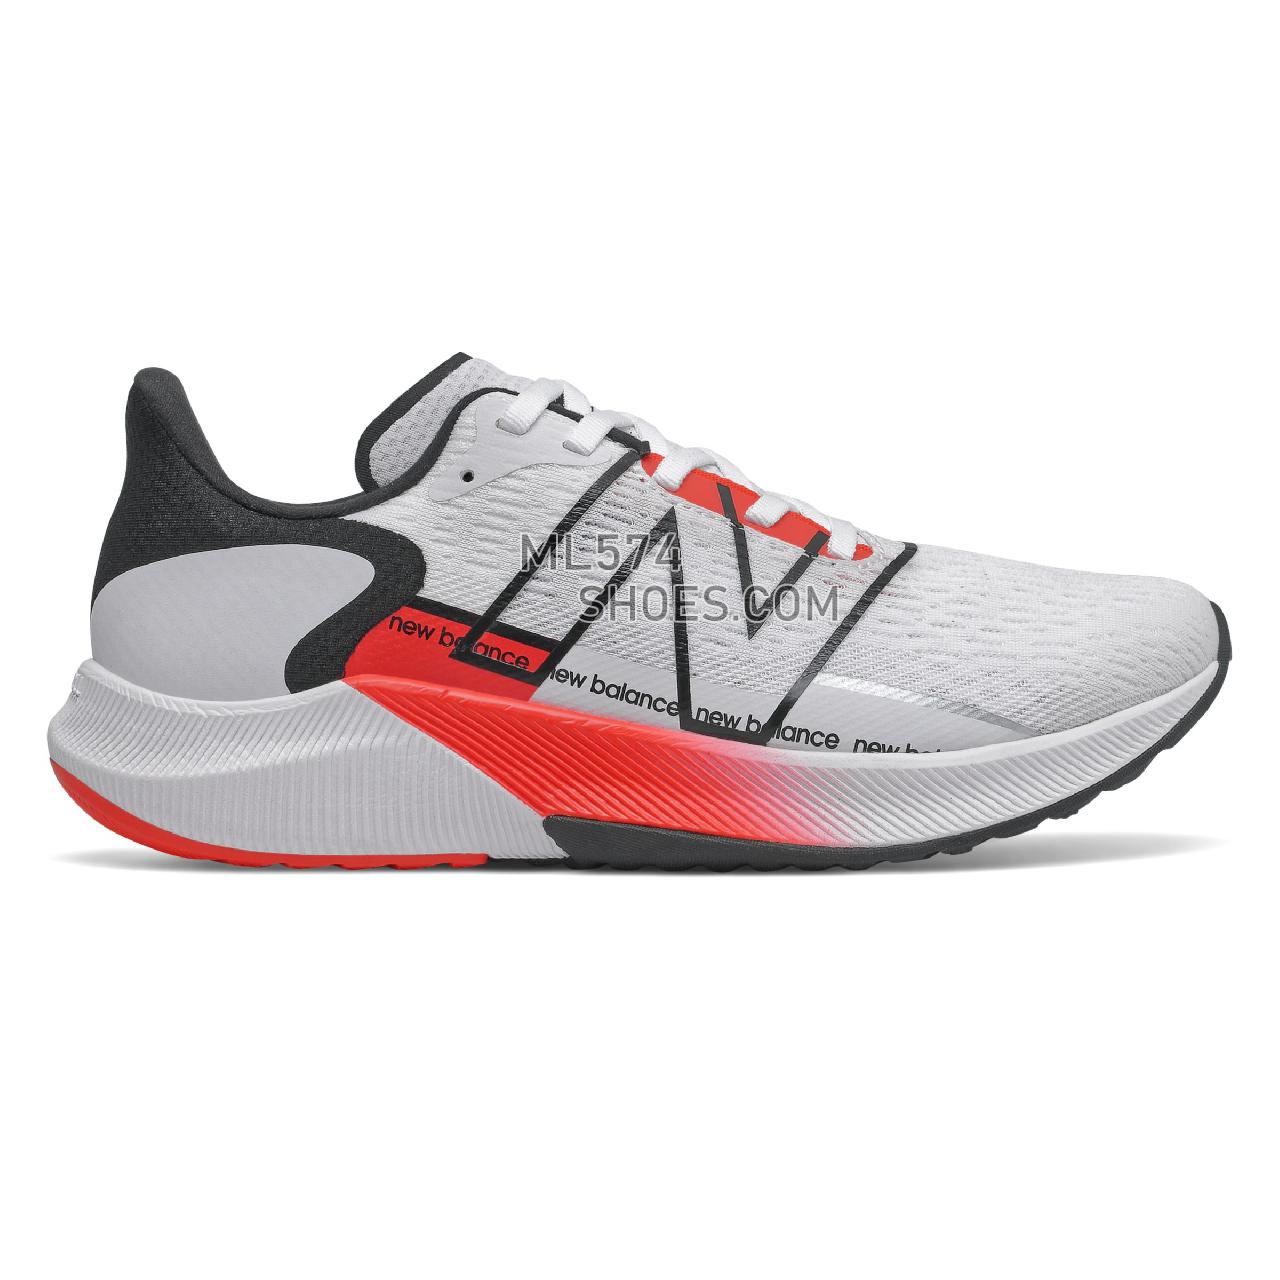 New Balance FuelCell Propel v2 - Women's Fuelcell Sleek And LightWeight - White with Neo Flame - WFCPRWR2